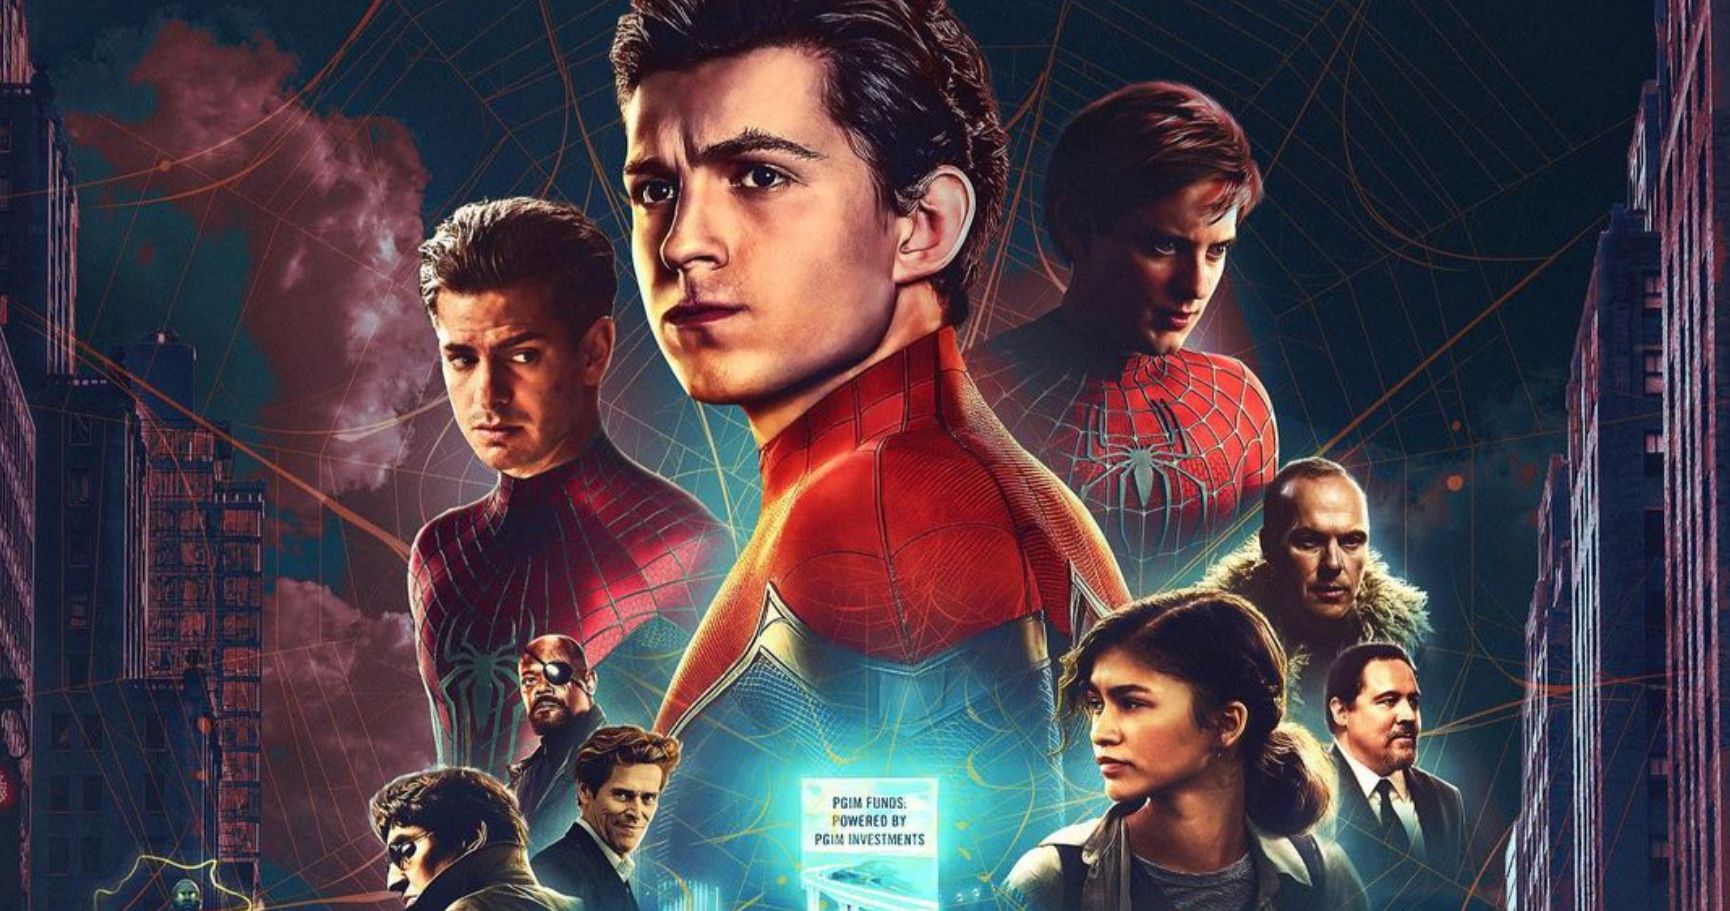 Spider-Man: No Way Home Fan Poster Imagines an Epic Spider-Verse Crossover